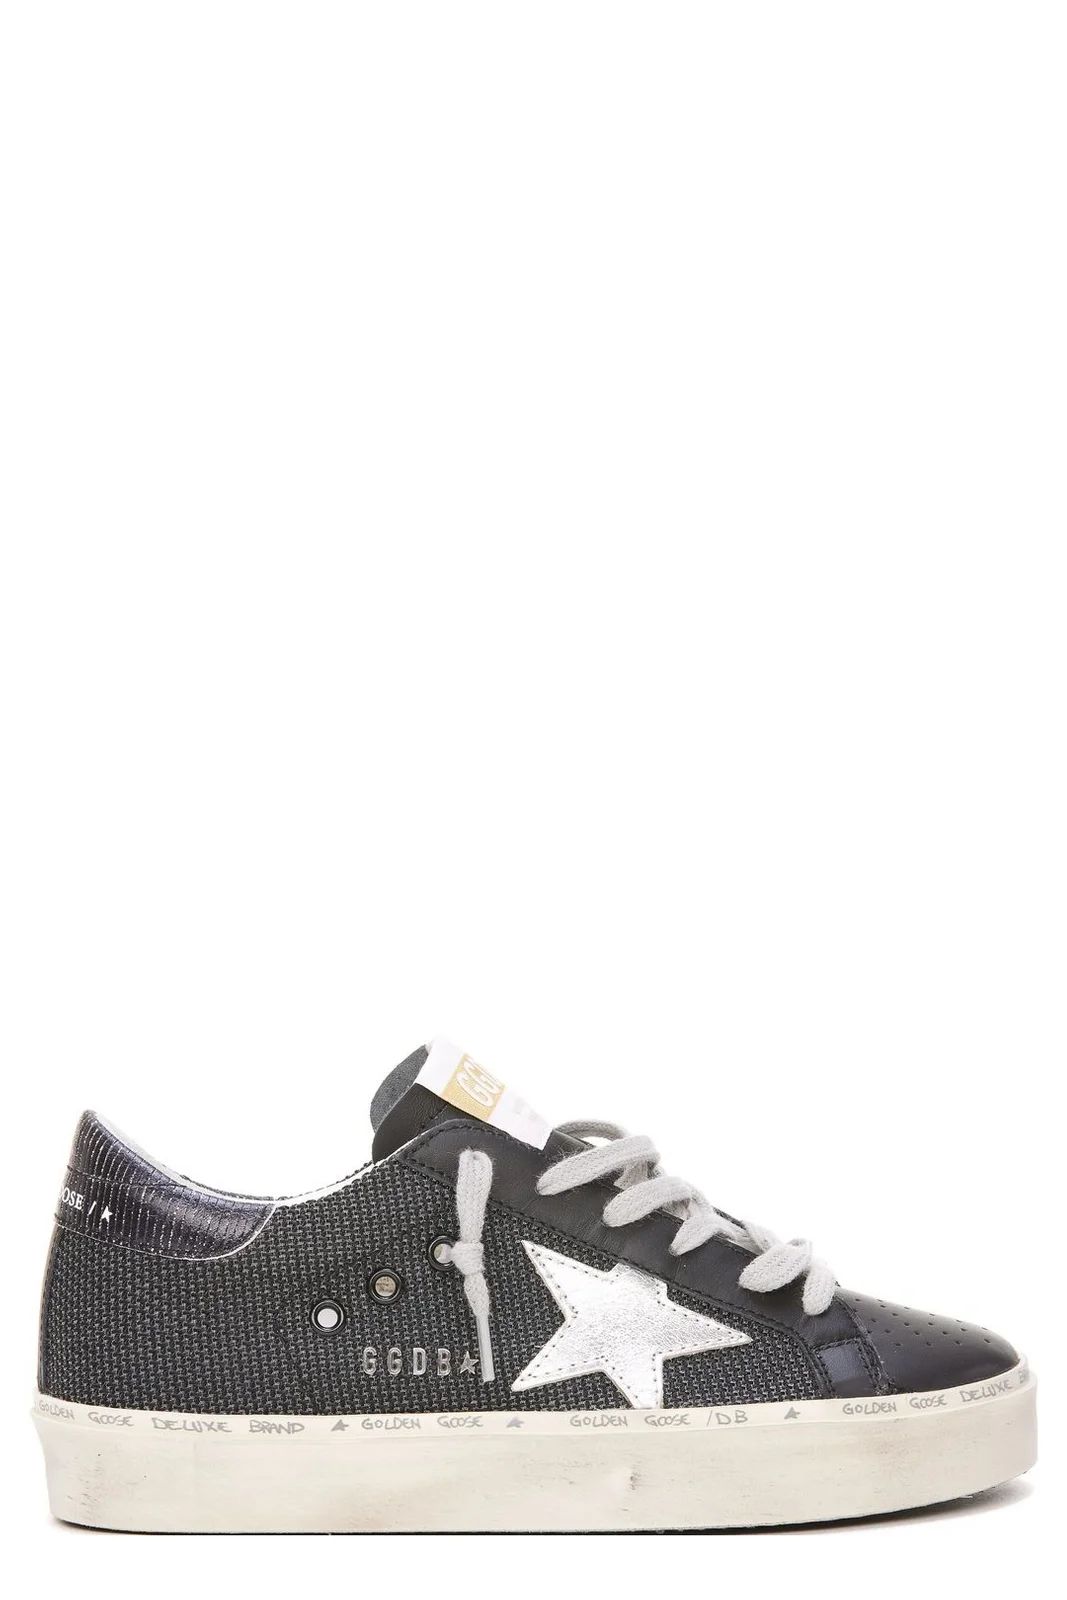 Golden Goose Deluxe Hi Star Lace-Up Sneakers | Cettire Global